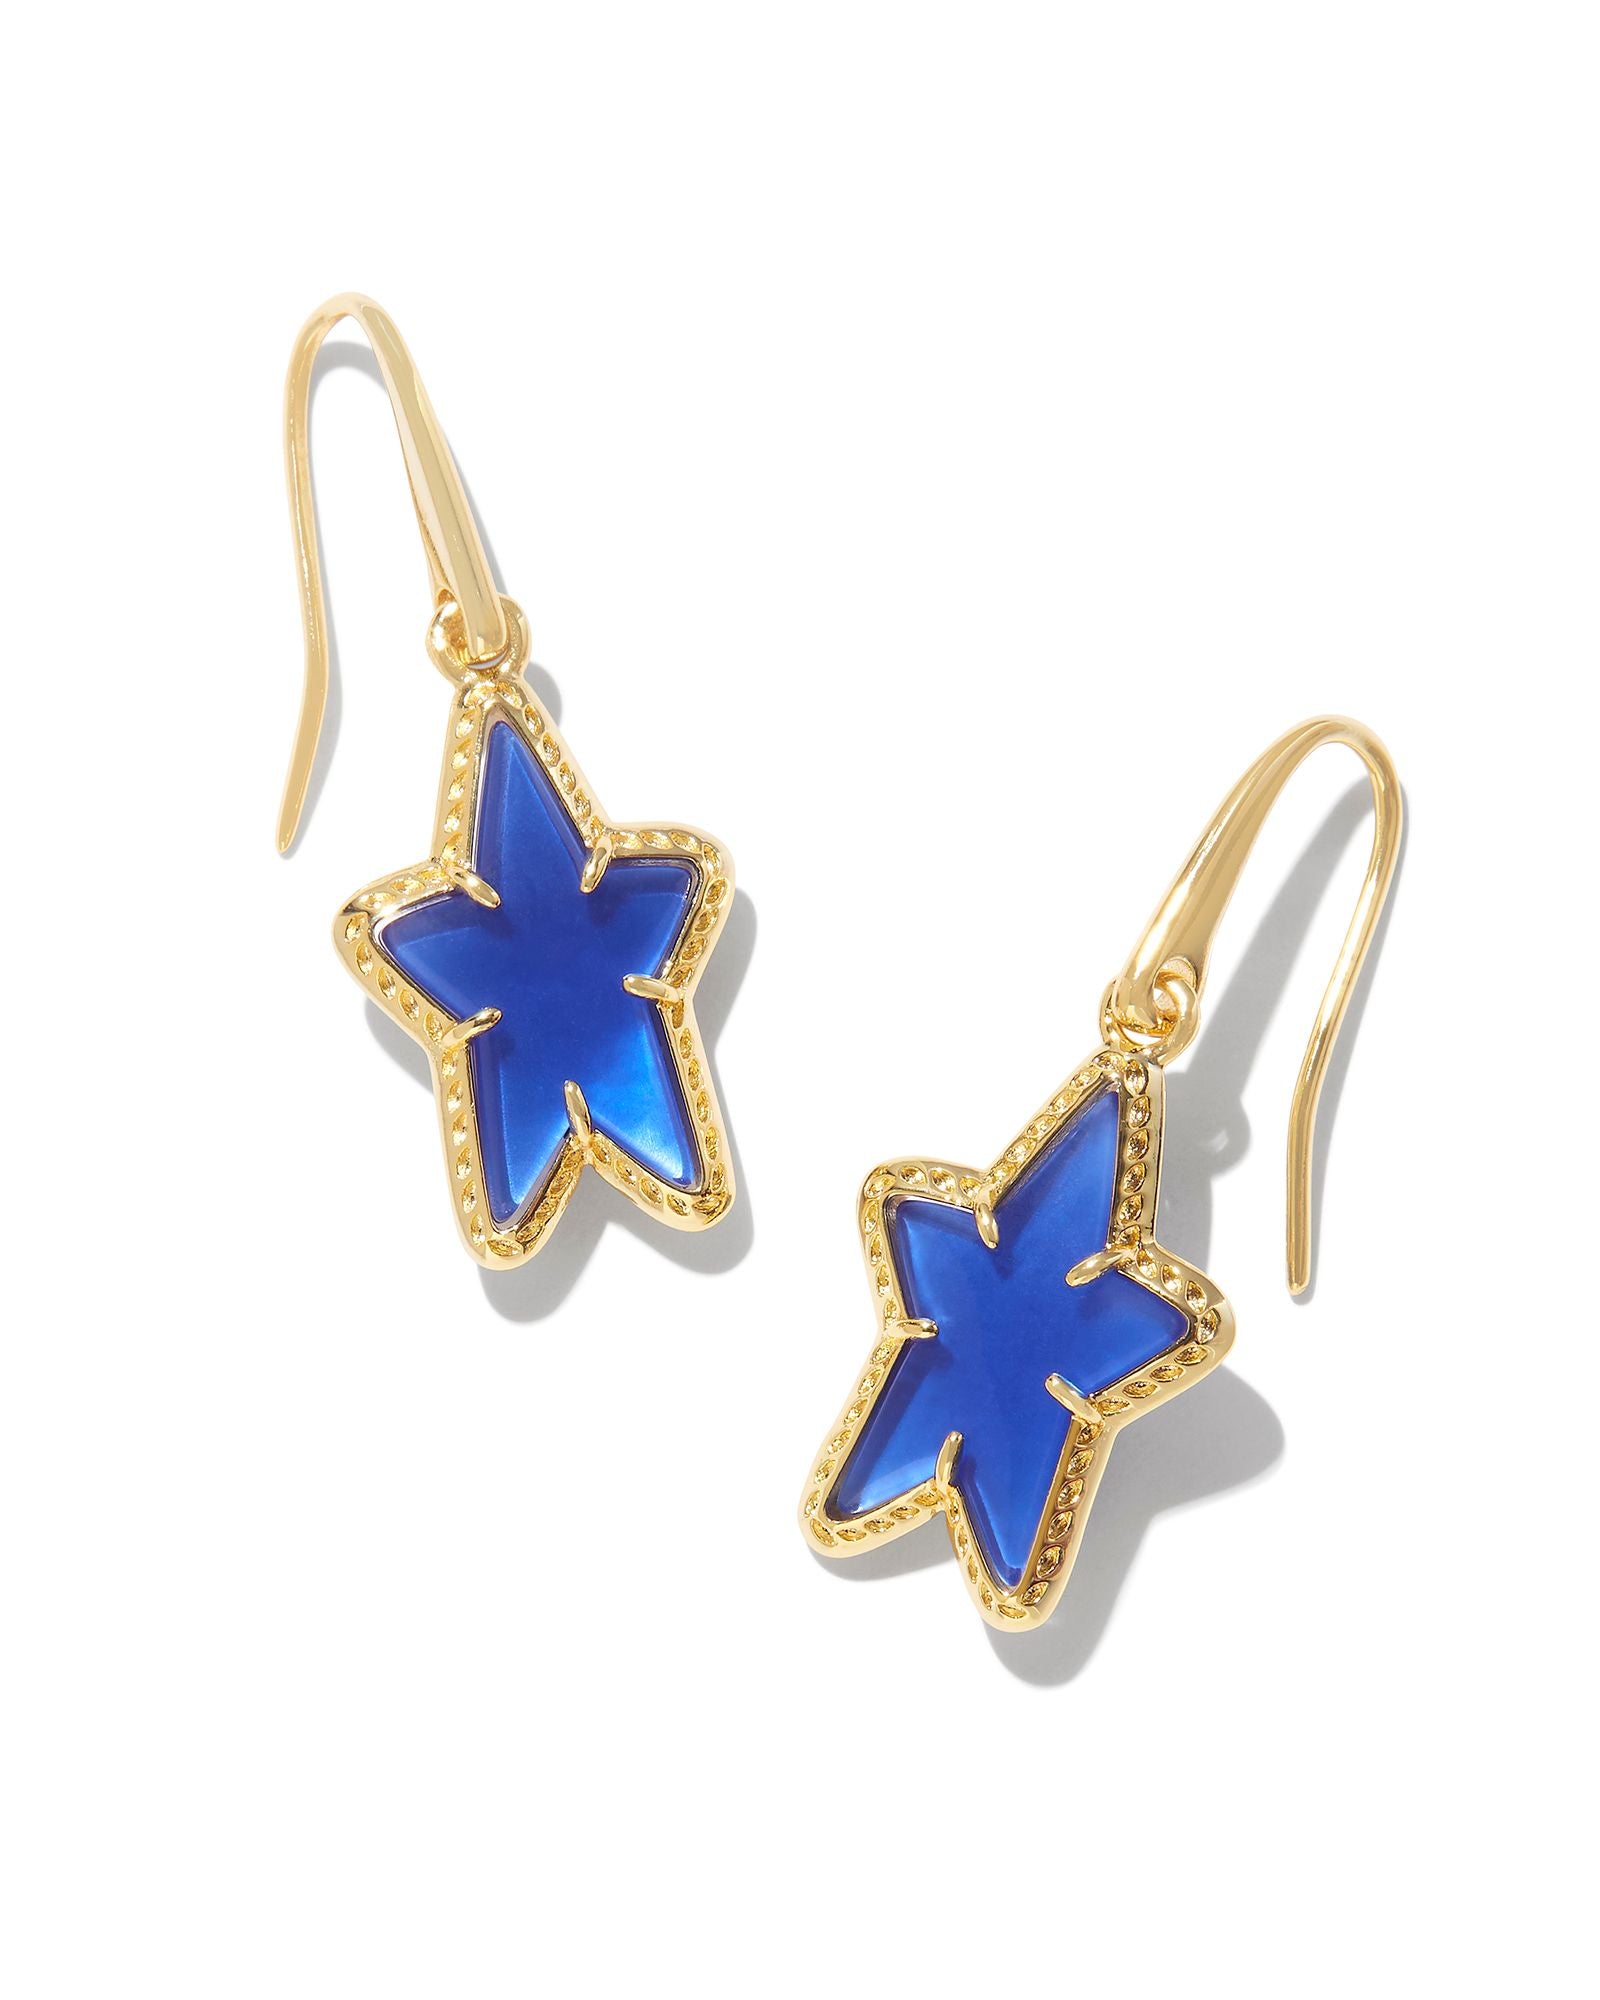 Ada Star Small Drop Earrings in Gold Cobalt Blue Illusion